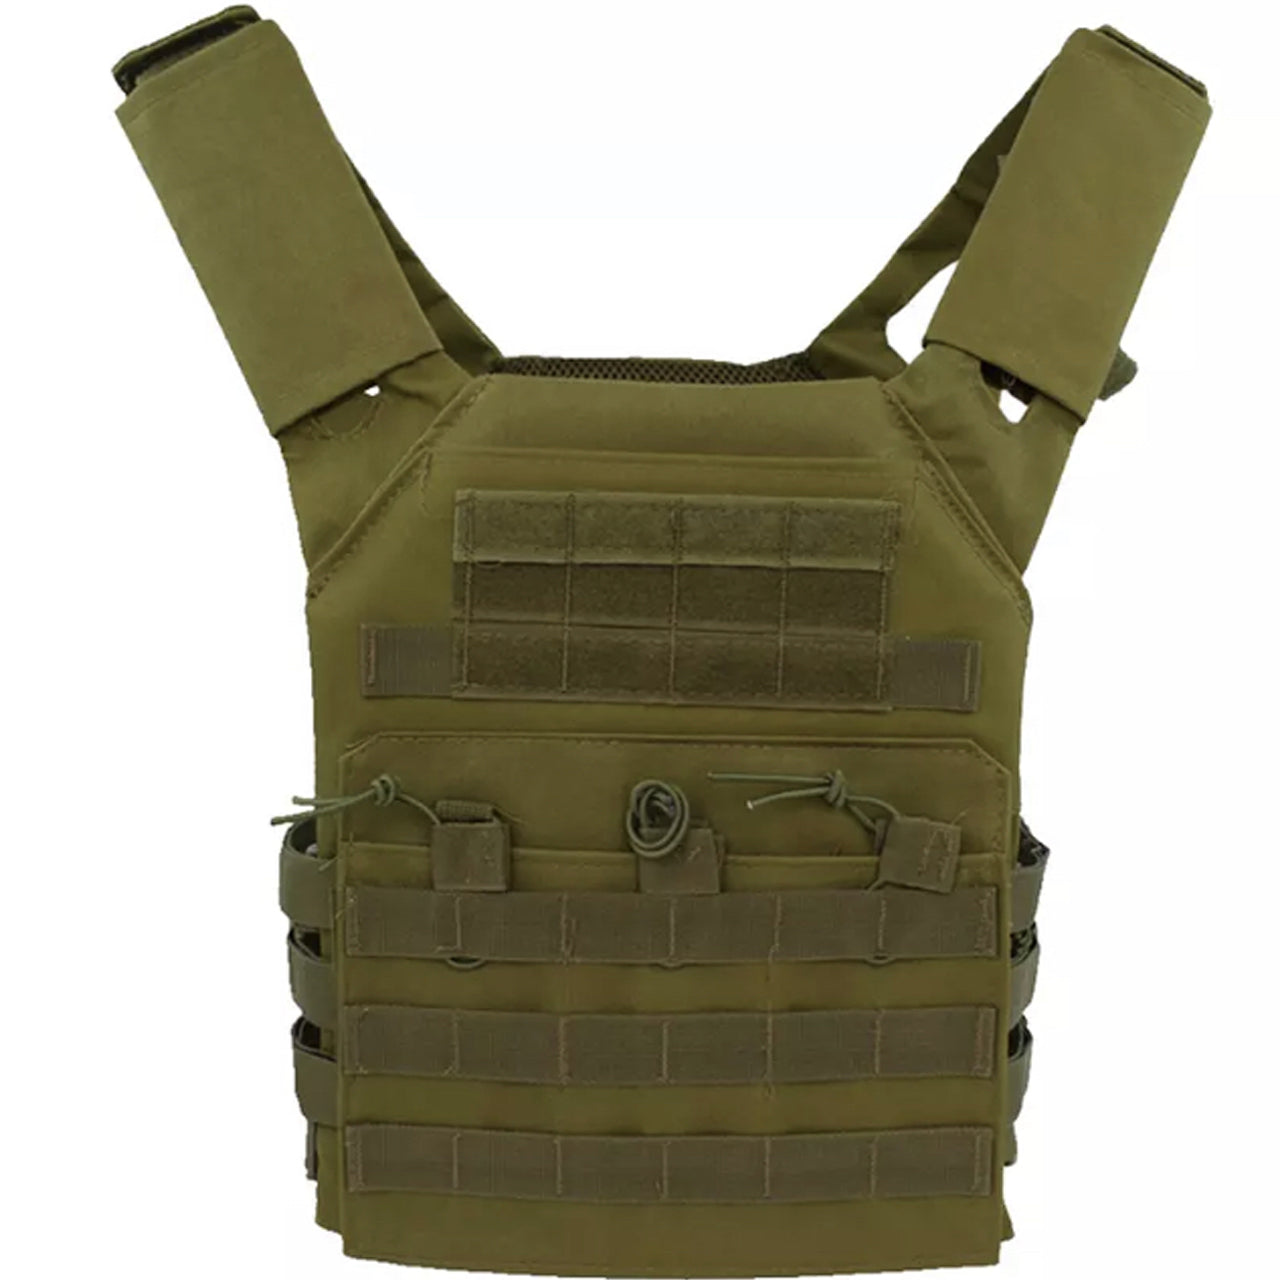 600D Oxford Body Armour PVC Coating Adjustable for most body types, shoulder and waist can be adjusted to fit your style Foam boards in both front and rear of the vest(board size is 30.5x24cm) Great for Military, cadets, airsoft and other outdoor activities www.defenceqstore.com.au